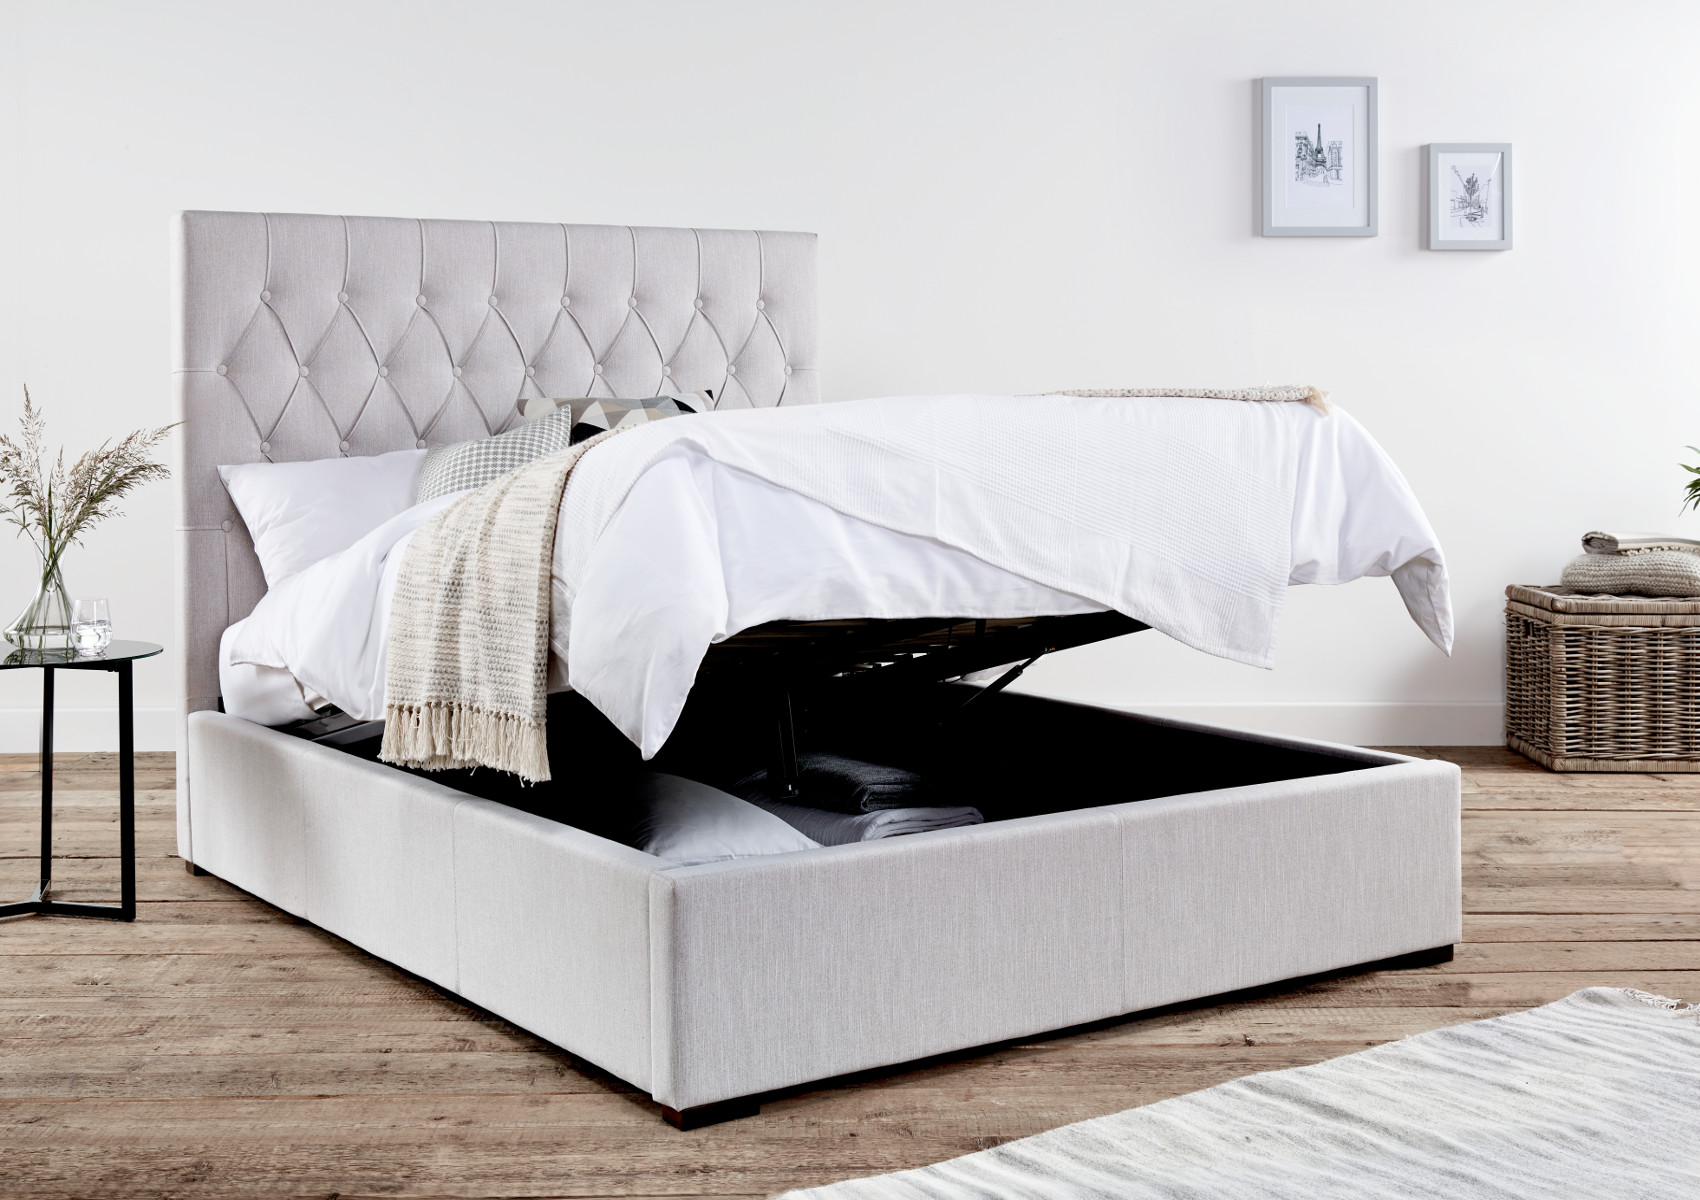 View Savoy Stone Upholstered Double Ottoman Bed Time4Sleep information